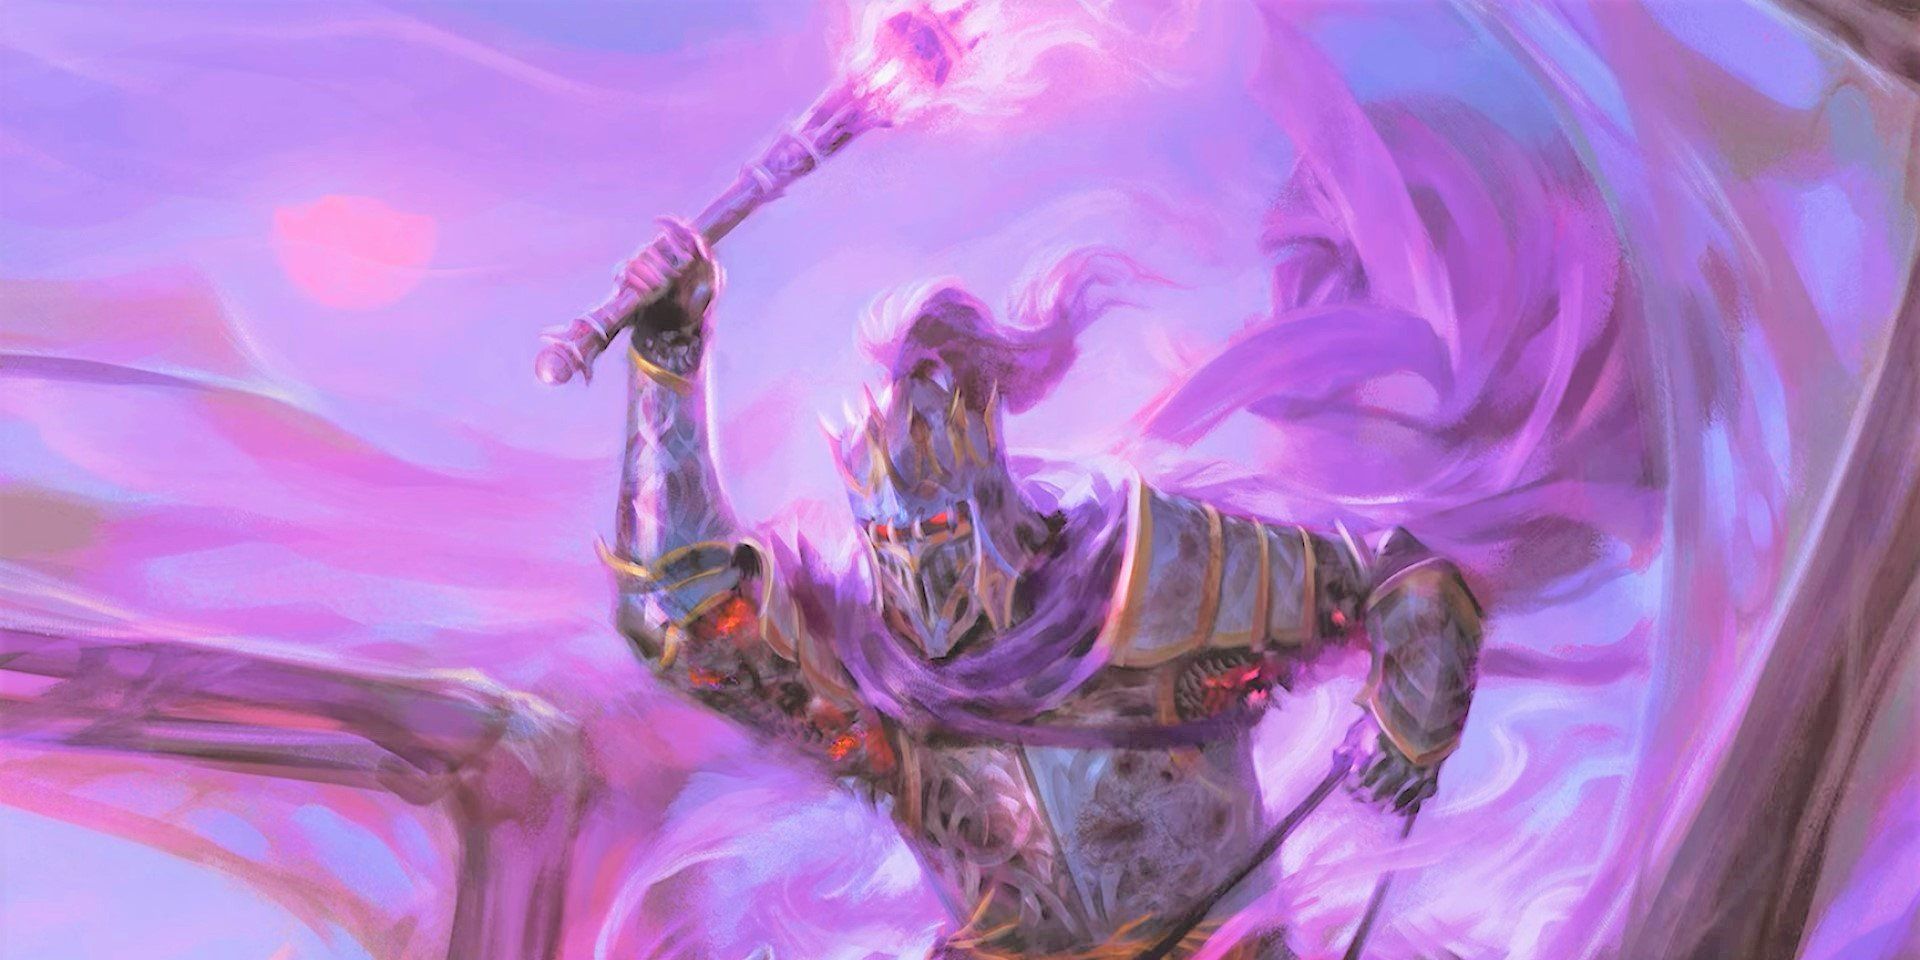 Lord Soth, a knight from the Dragonlance campaign for D&D, navigates purple mist with a torch held aloft.